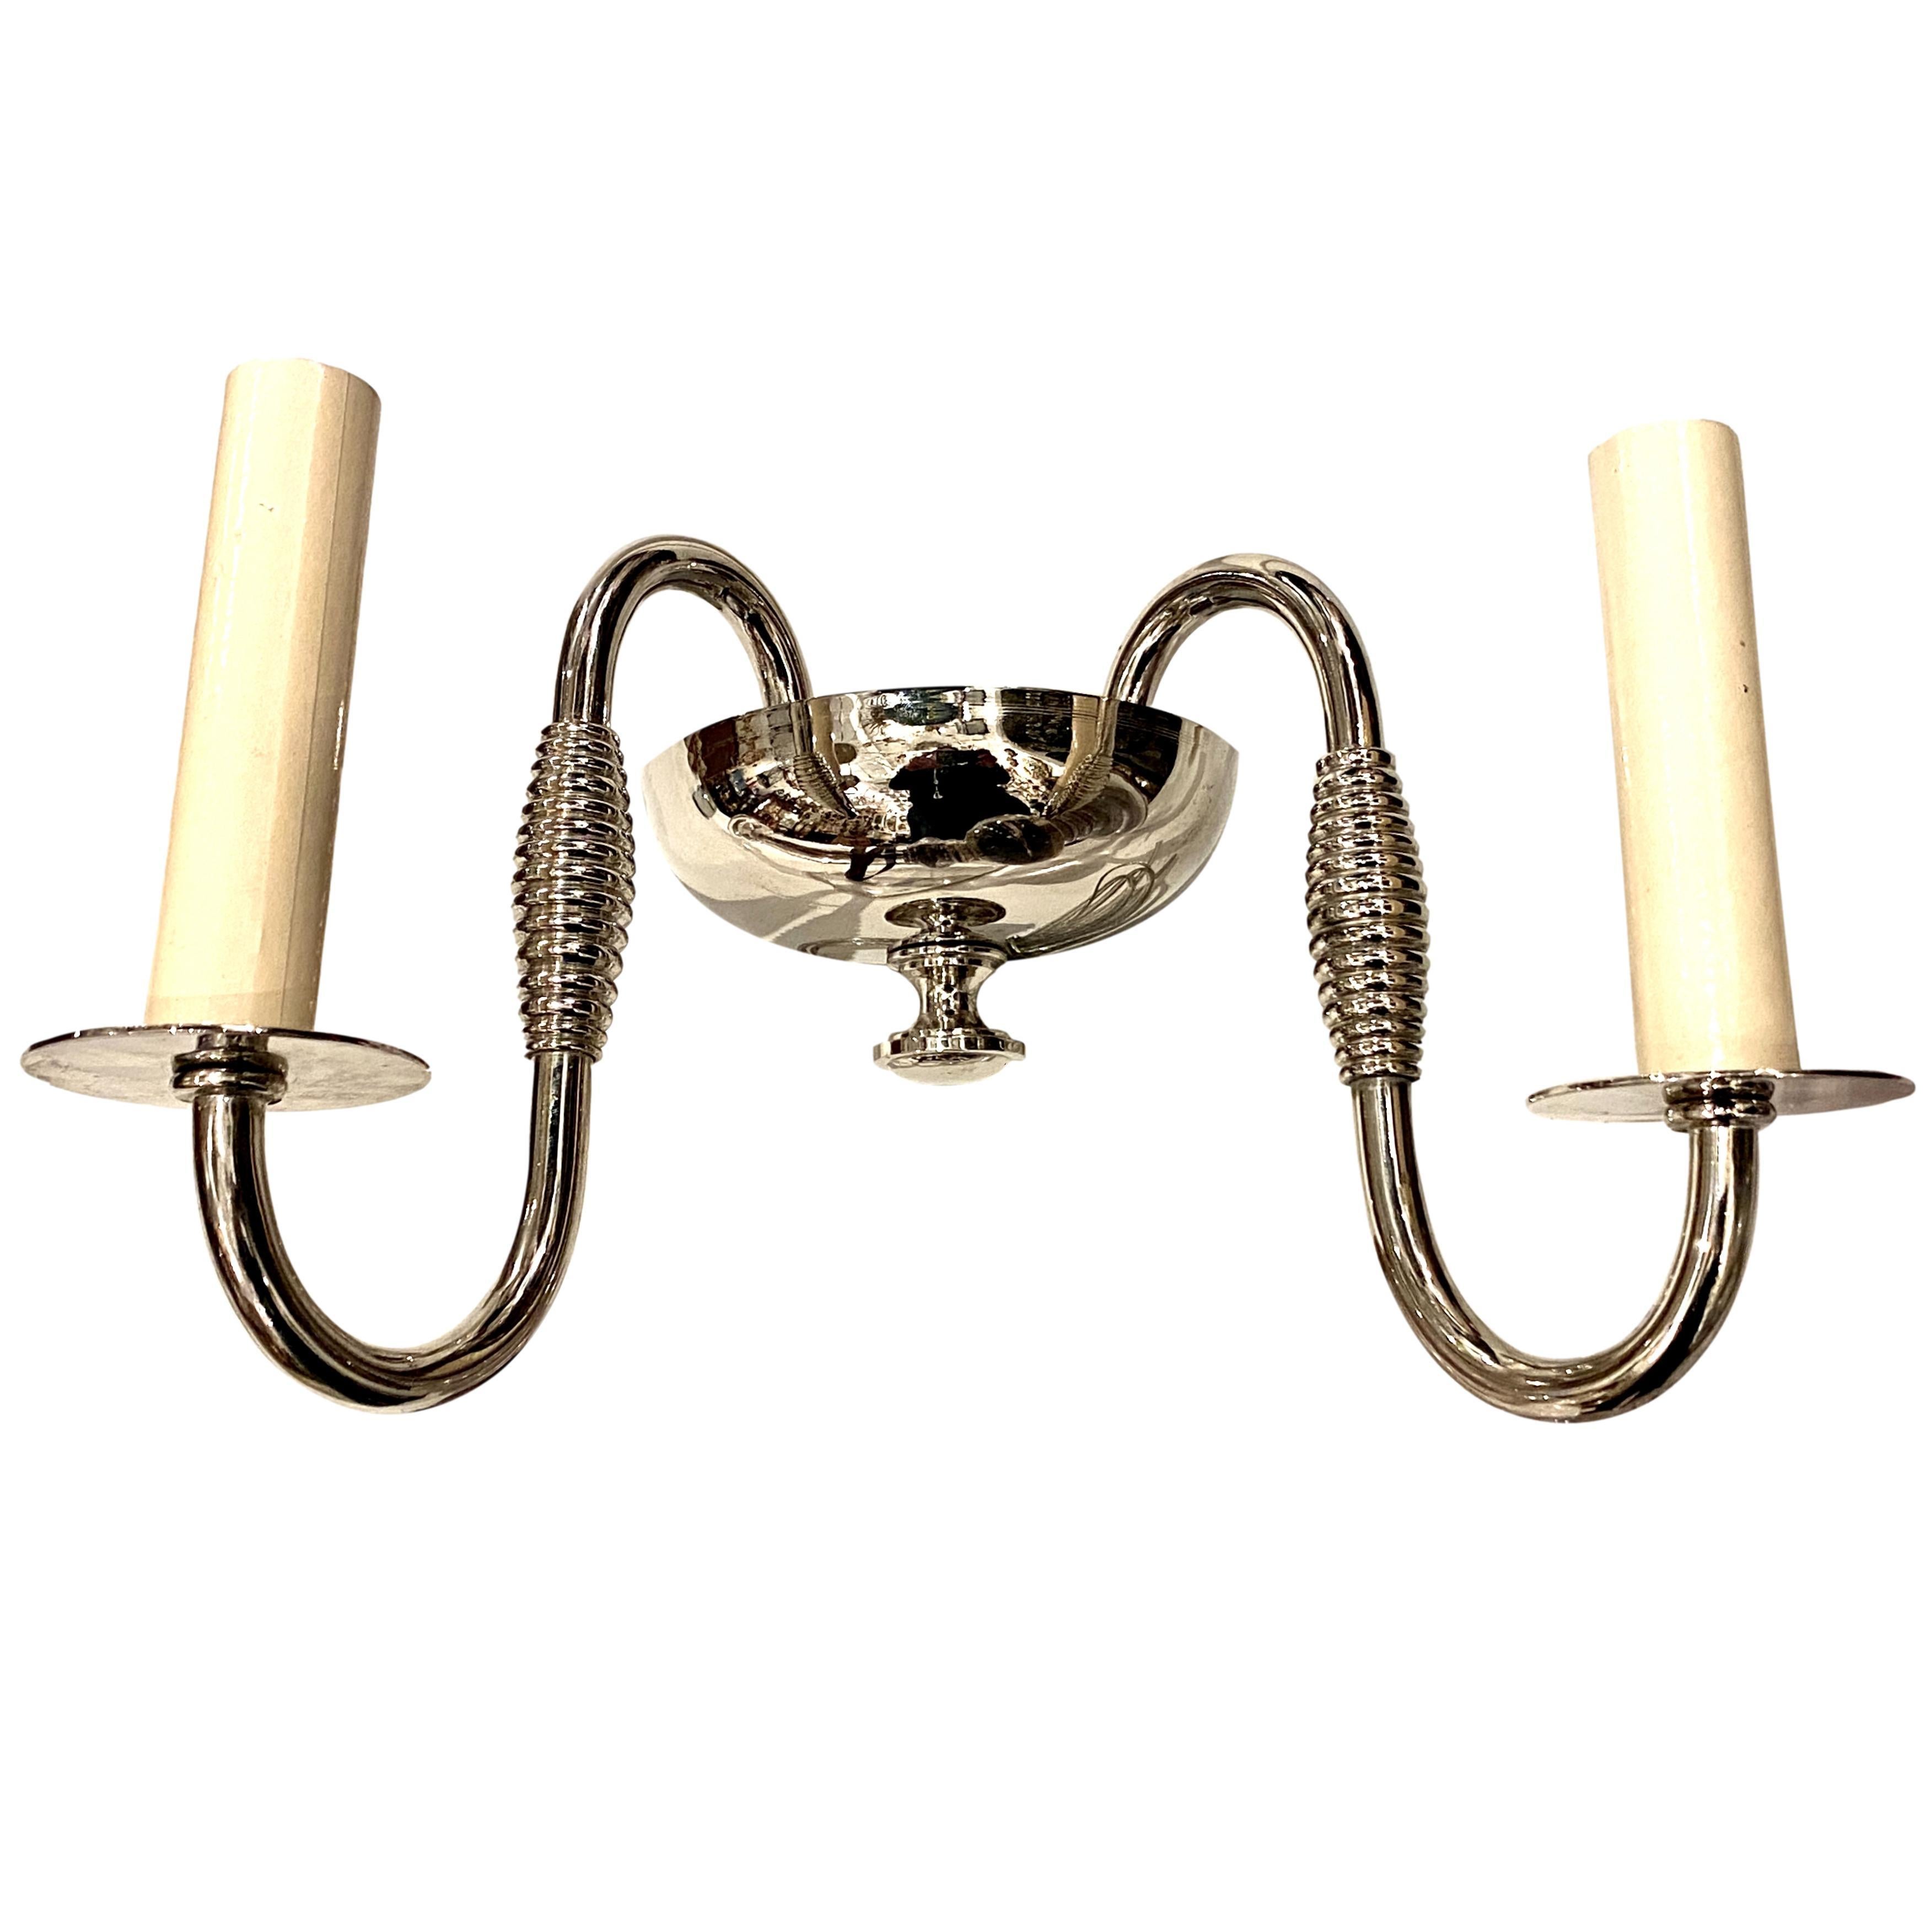 A pair of French circa 1940s Art Deco style nickel-plated two-arm sconces.

Measurements:
Height 7